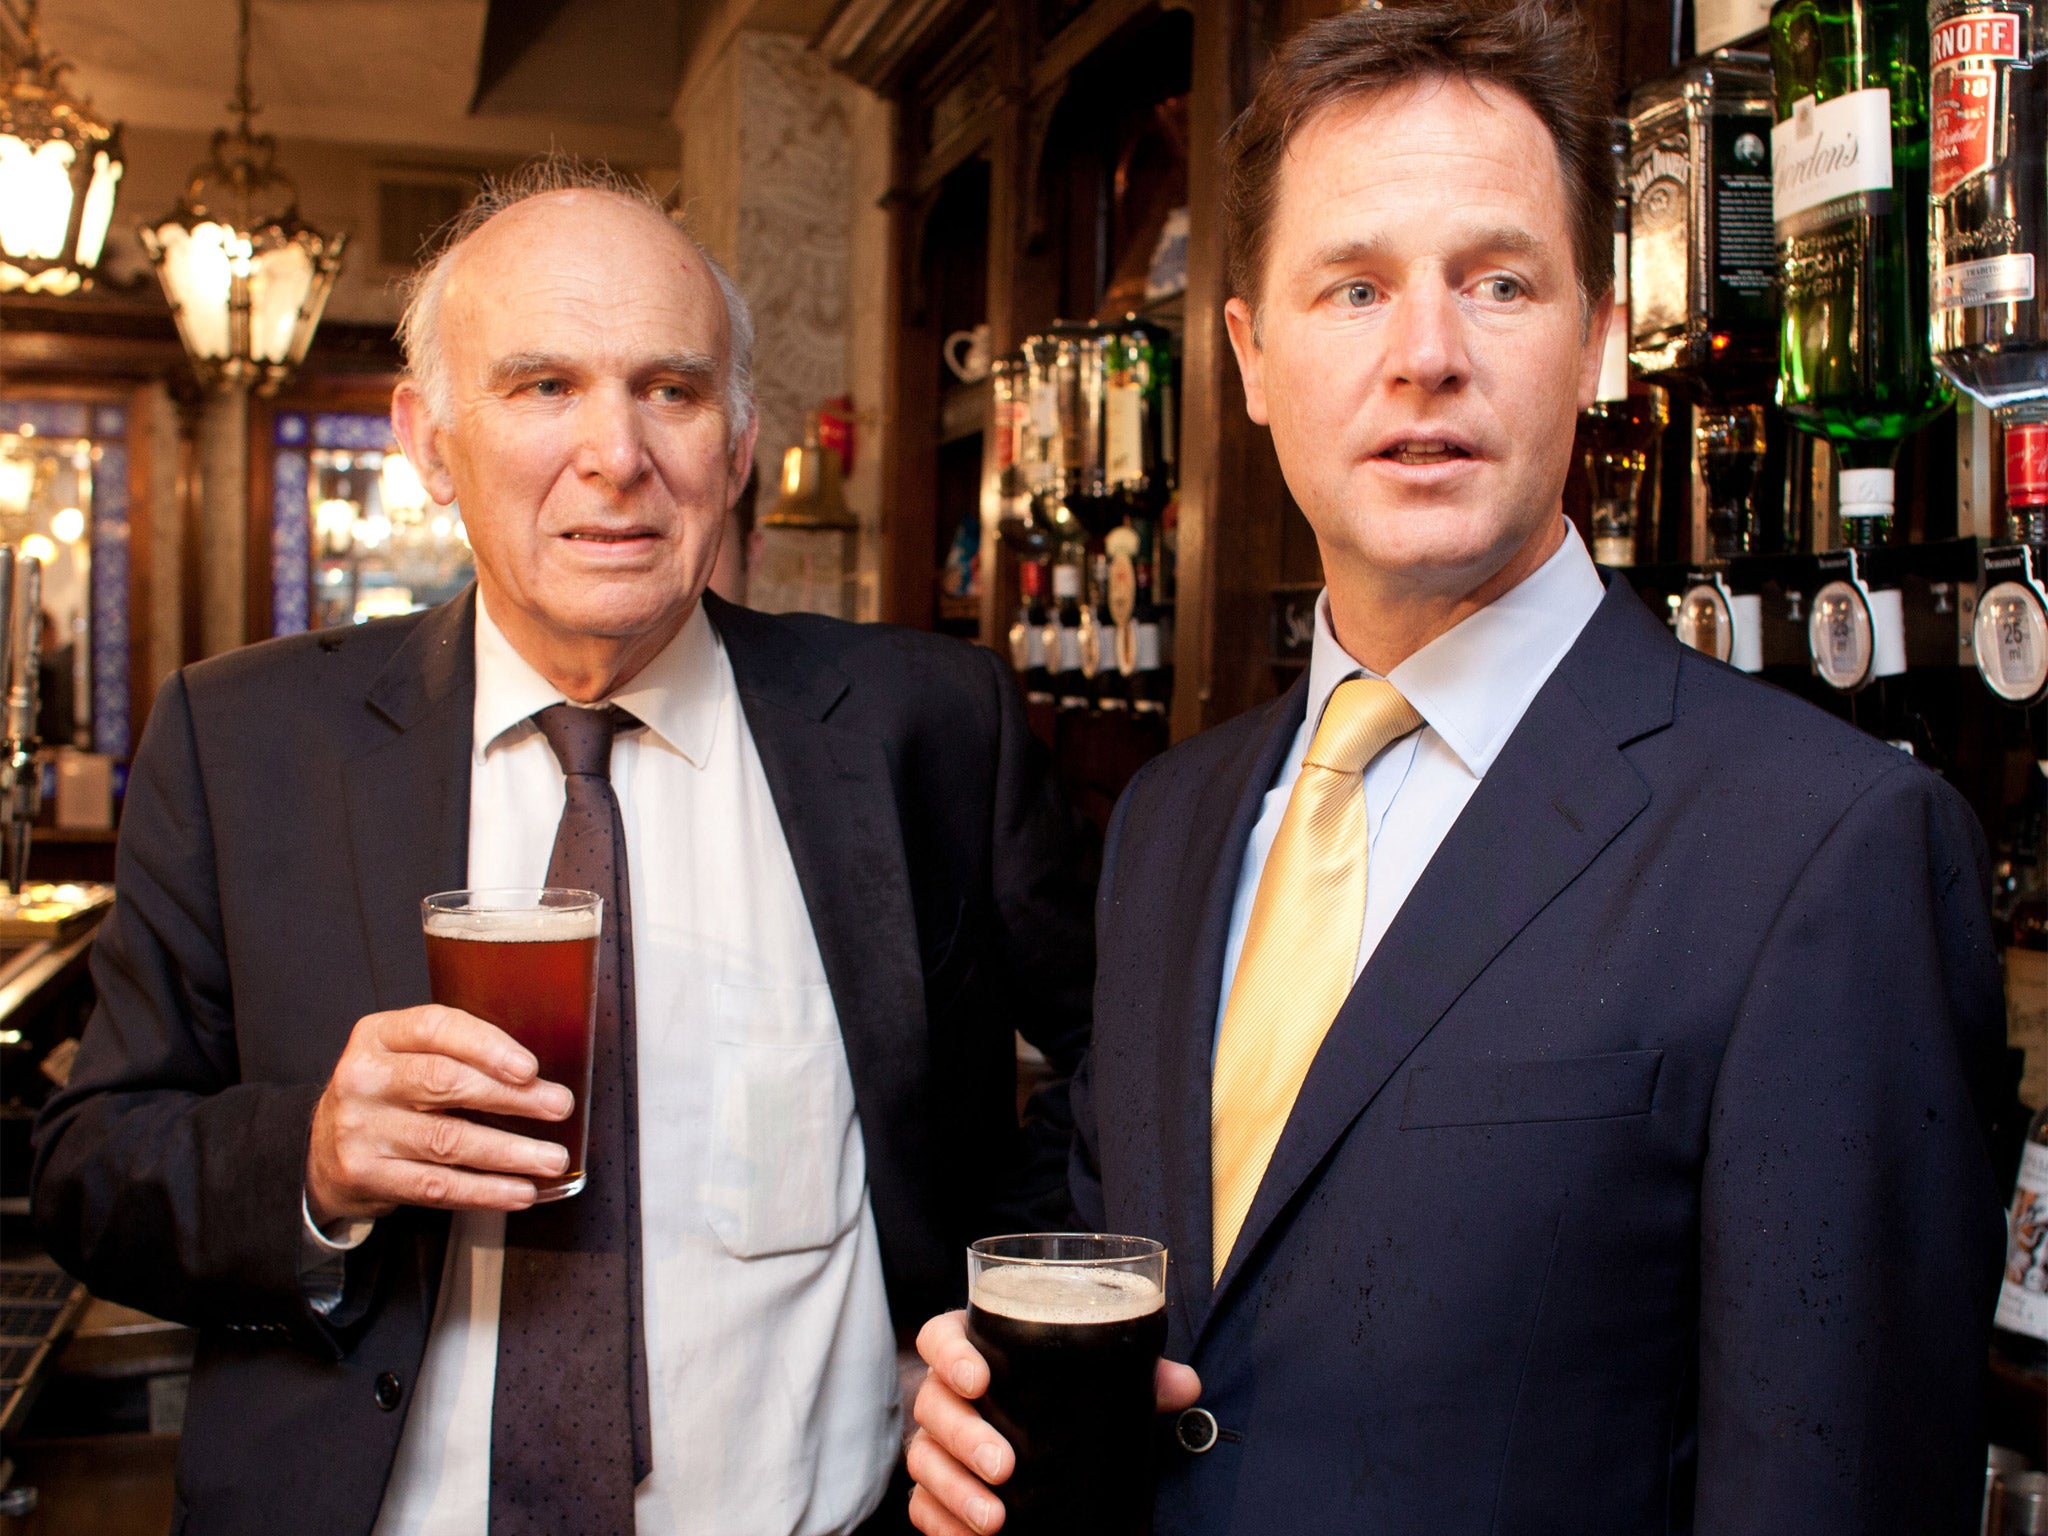 Vince Cable and Nick Clegg at the Queens Head Pub